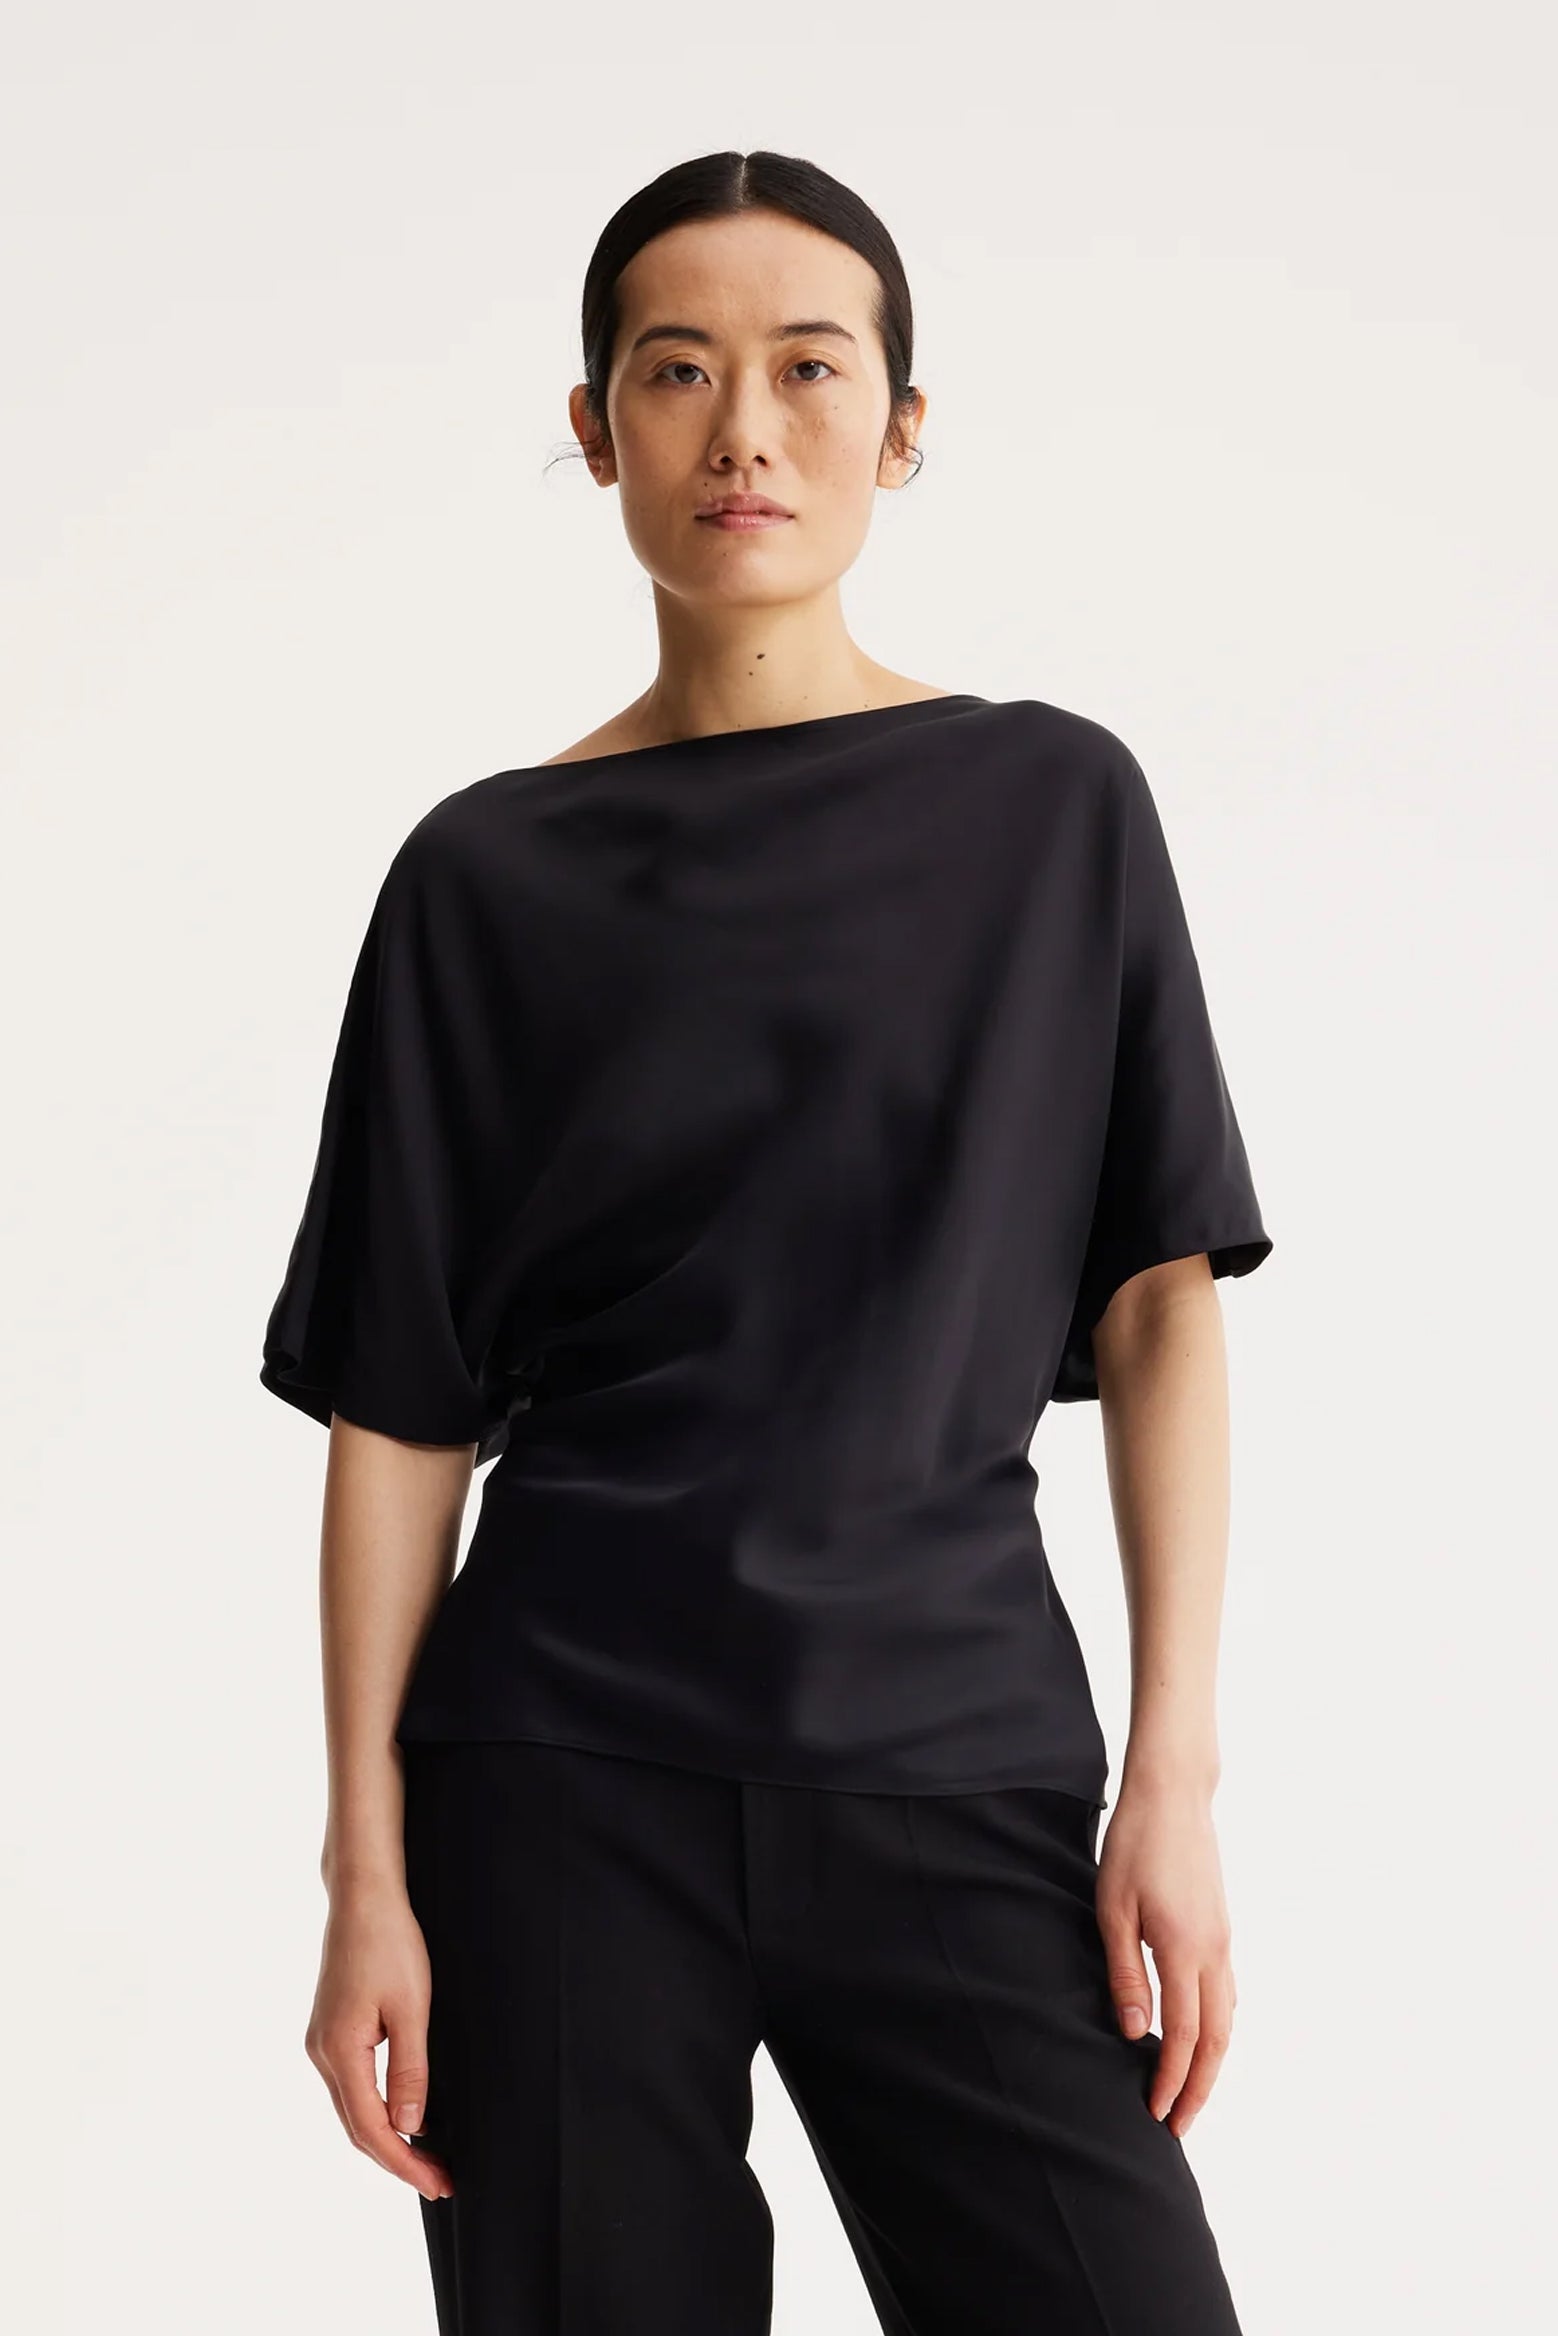 Rohe Fluid Satin Top in Noir available at The New Trend Australia.